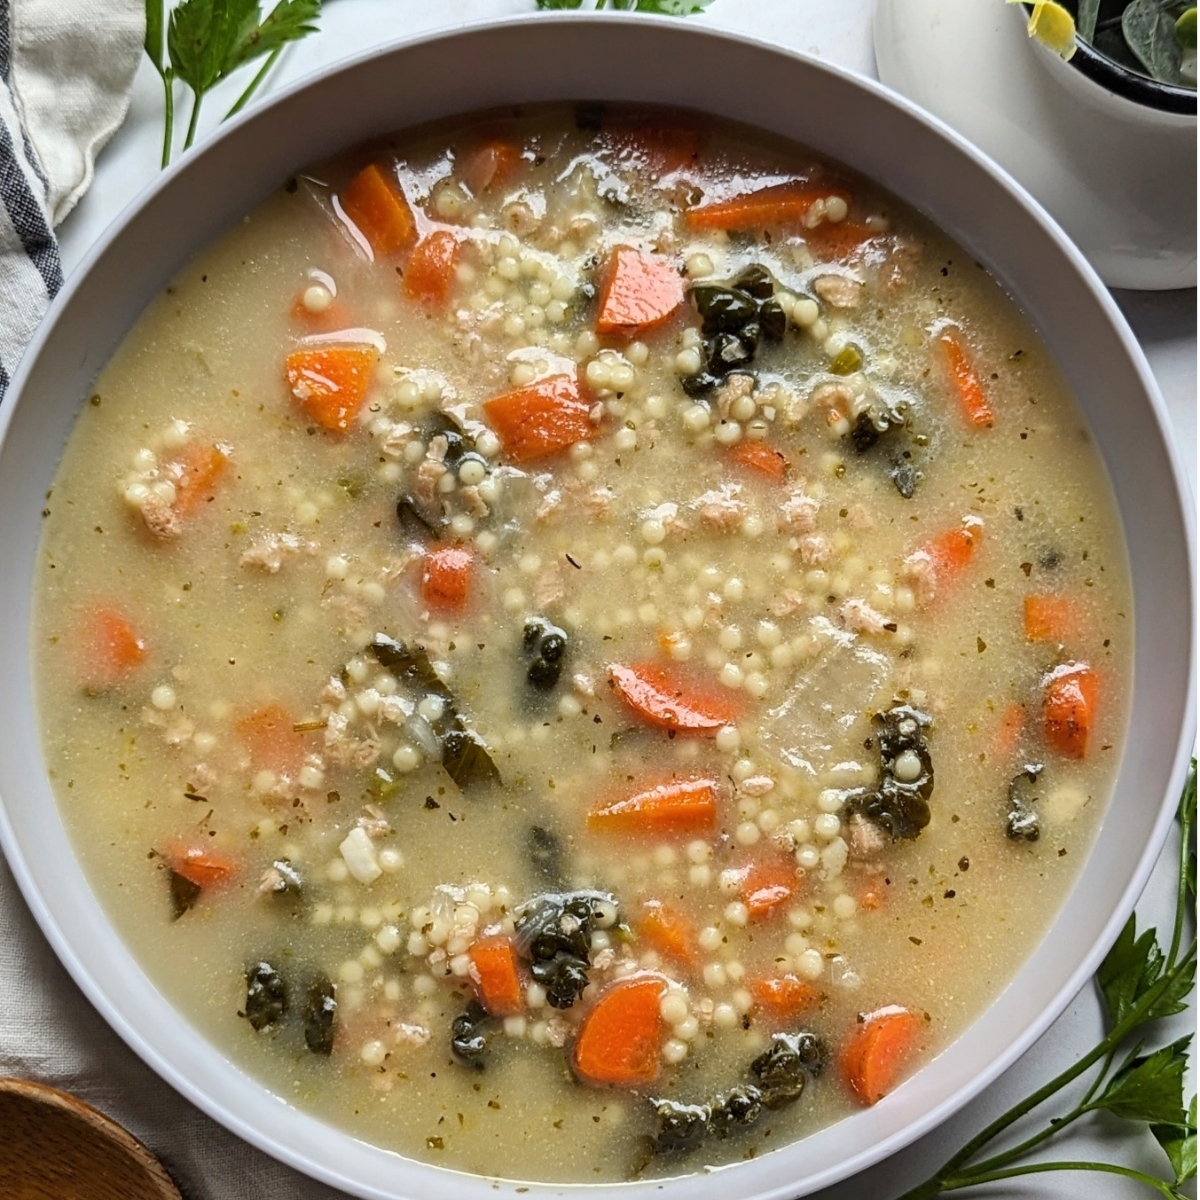 vegan Italian wedding soup recipe with carrots kale or spinach pastina or orzo and tvp sausage instead of meatballs